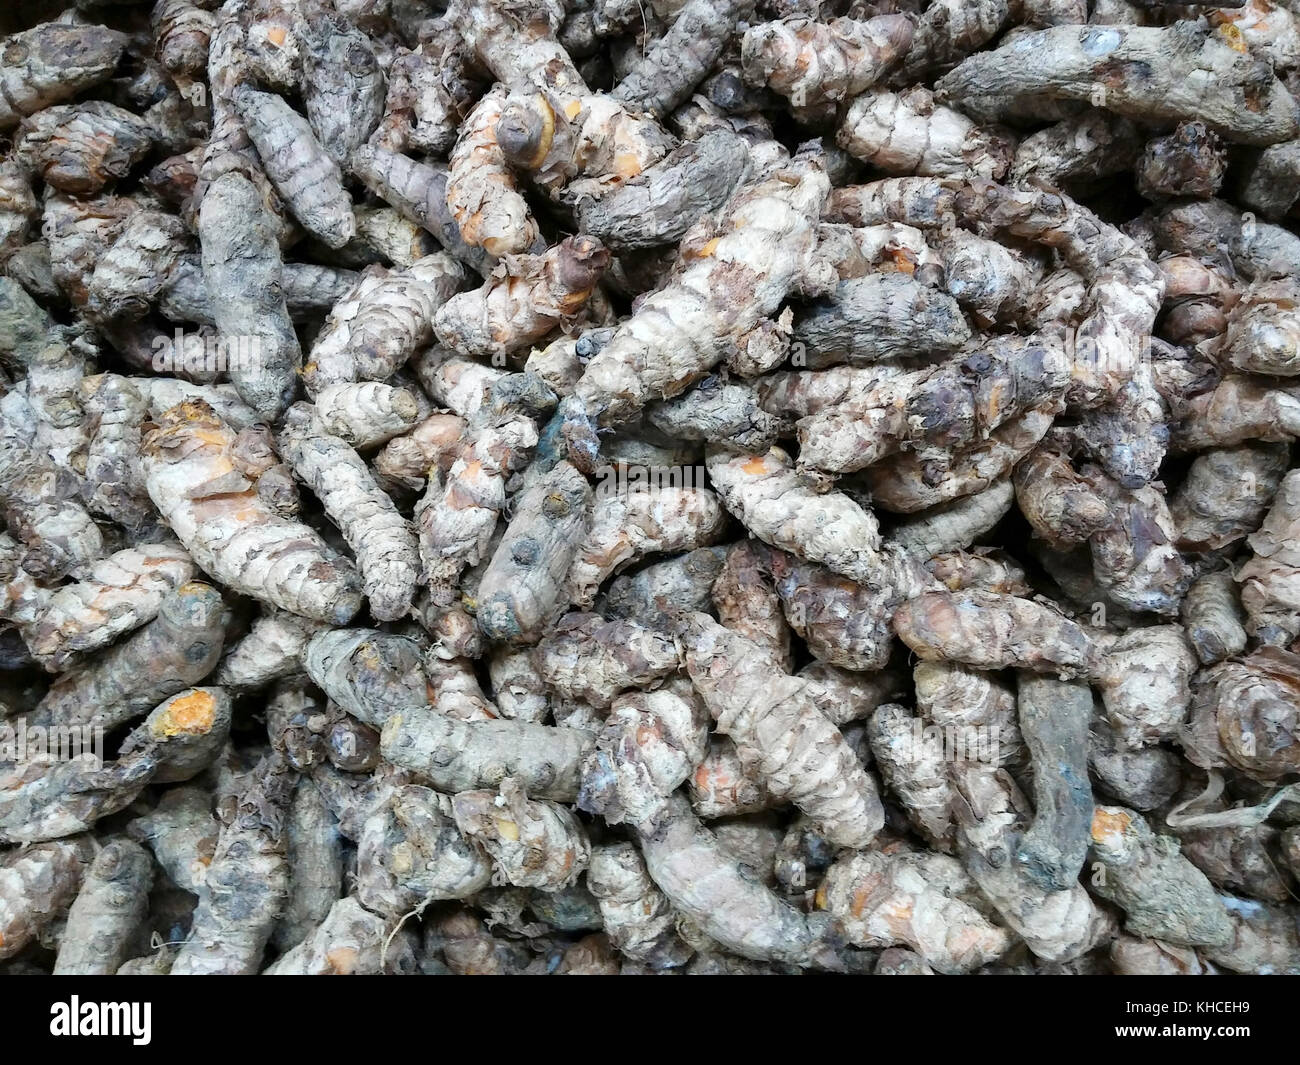 Turmeric roots are seen in a grocery in New York on Thursday, November 9, 2017. Turmeric has become the 'it' spice with its proponents touting its medicinal and health qualities, which include, but are not limited to, fighting cancer, heart disease, diabetes, bloating, menstrual pain and a whole litany of ailments.  (© Richard B. Levine) Stock Photo